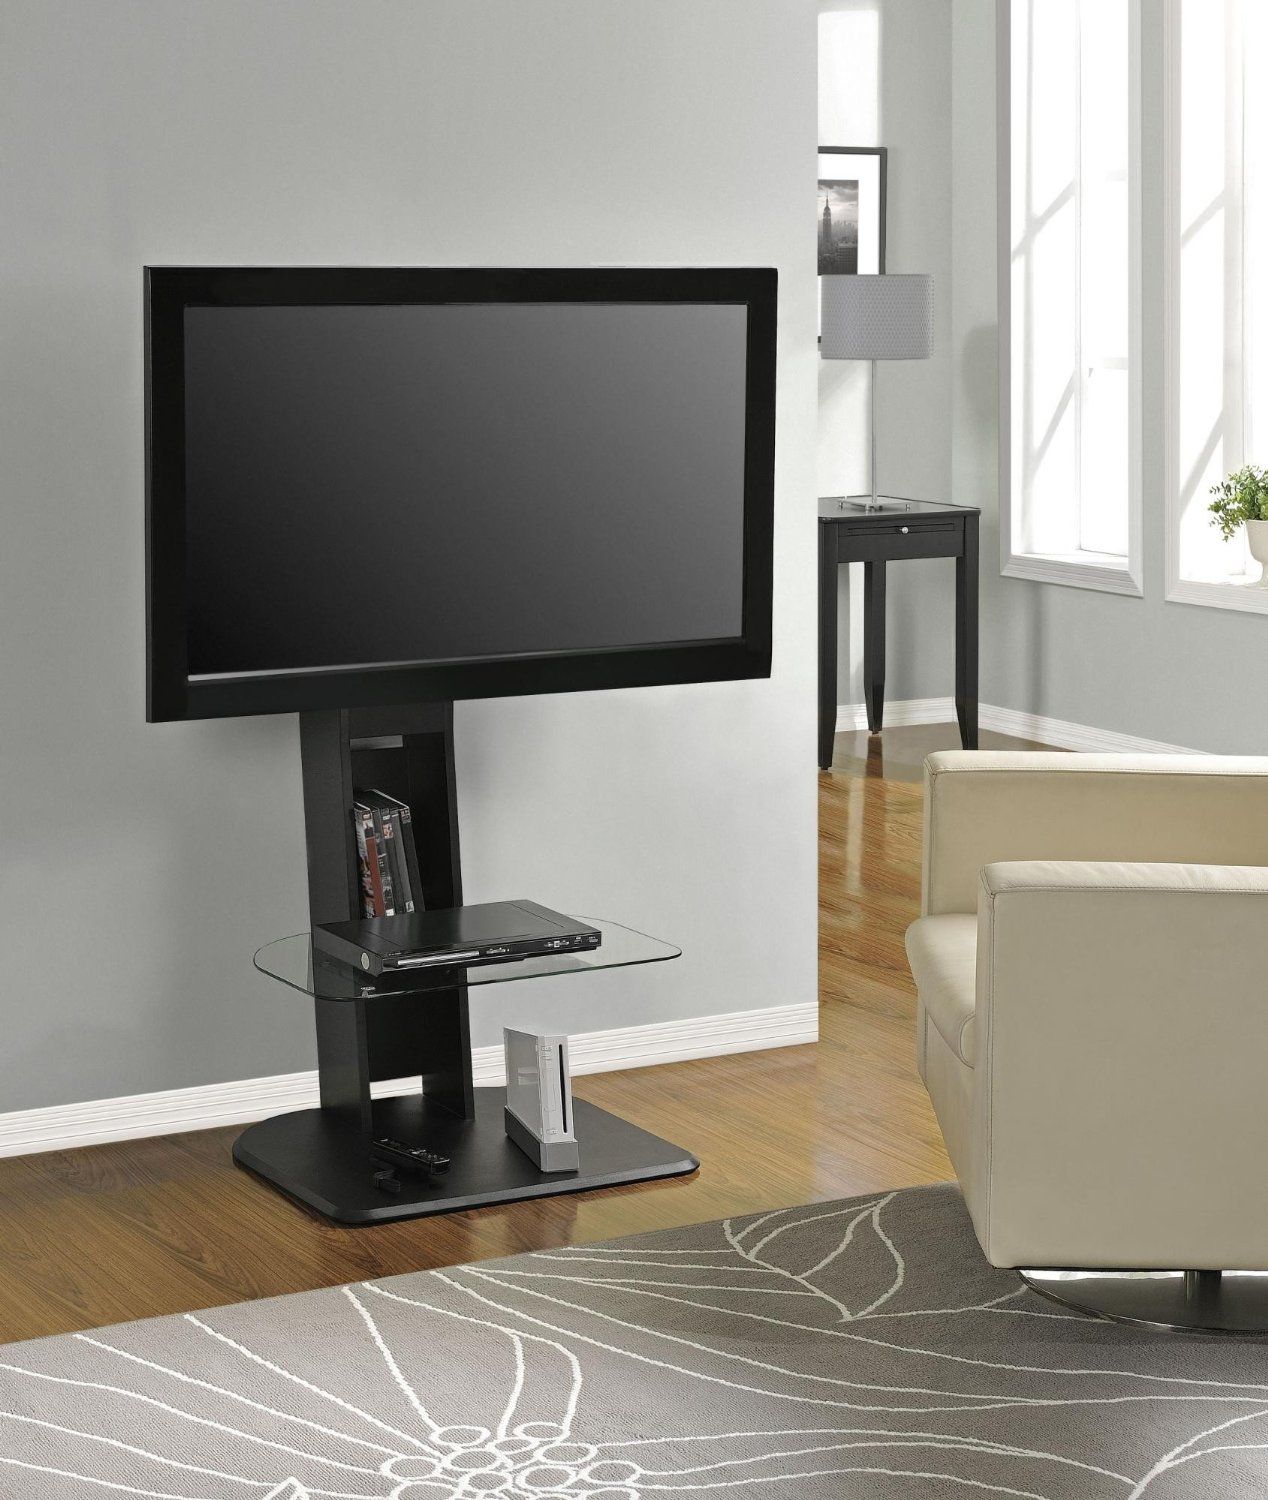 Cool Flat Screen Tv Stands With Mount | Homesfeed Within Stand For Flat Screen (Gallery 11 of 20)